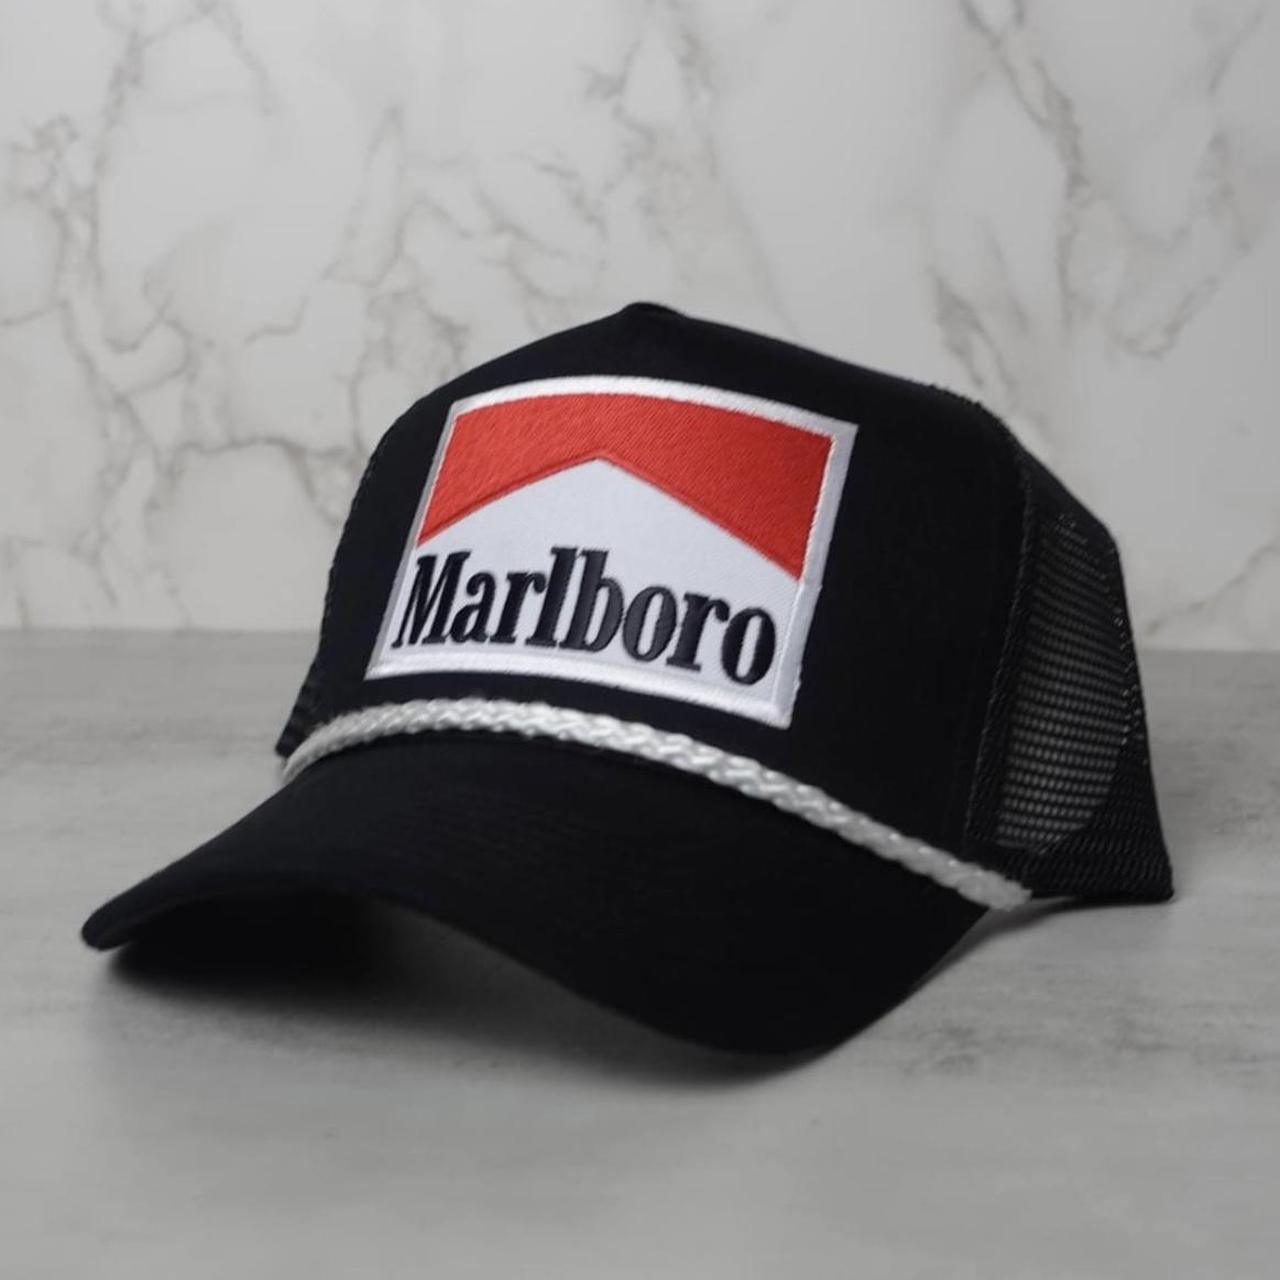 Marlboro Trucker Hat, Crafted from high quality